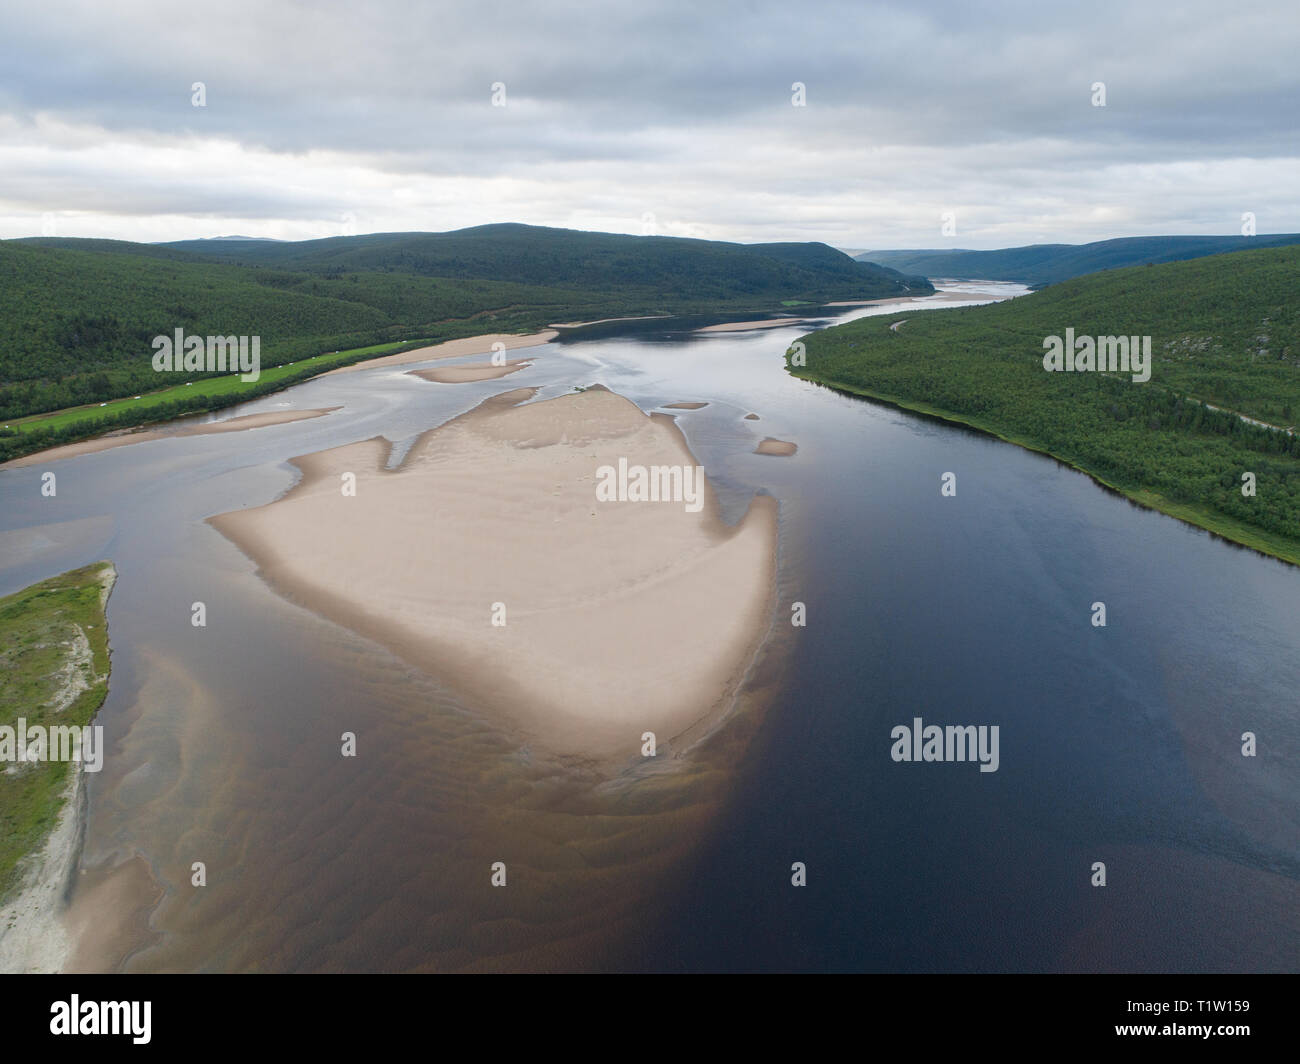 Aerial view of Teno aka Tana river between Norway and Finland at summer. Teno river is well known for its salmon fishery. Stock Photo